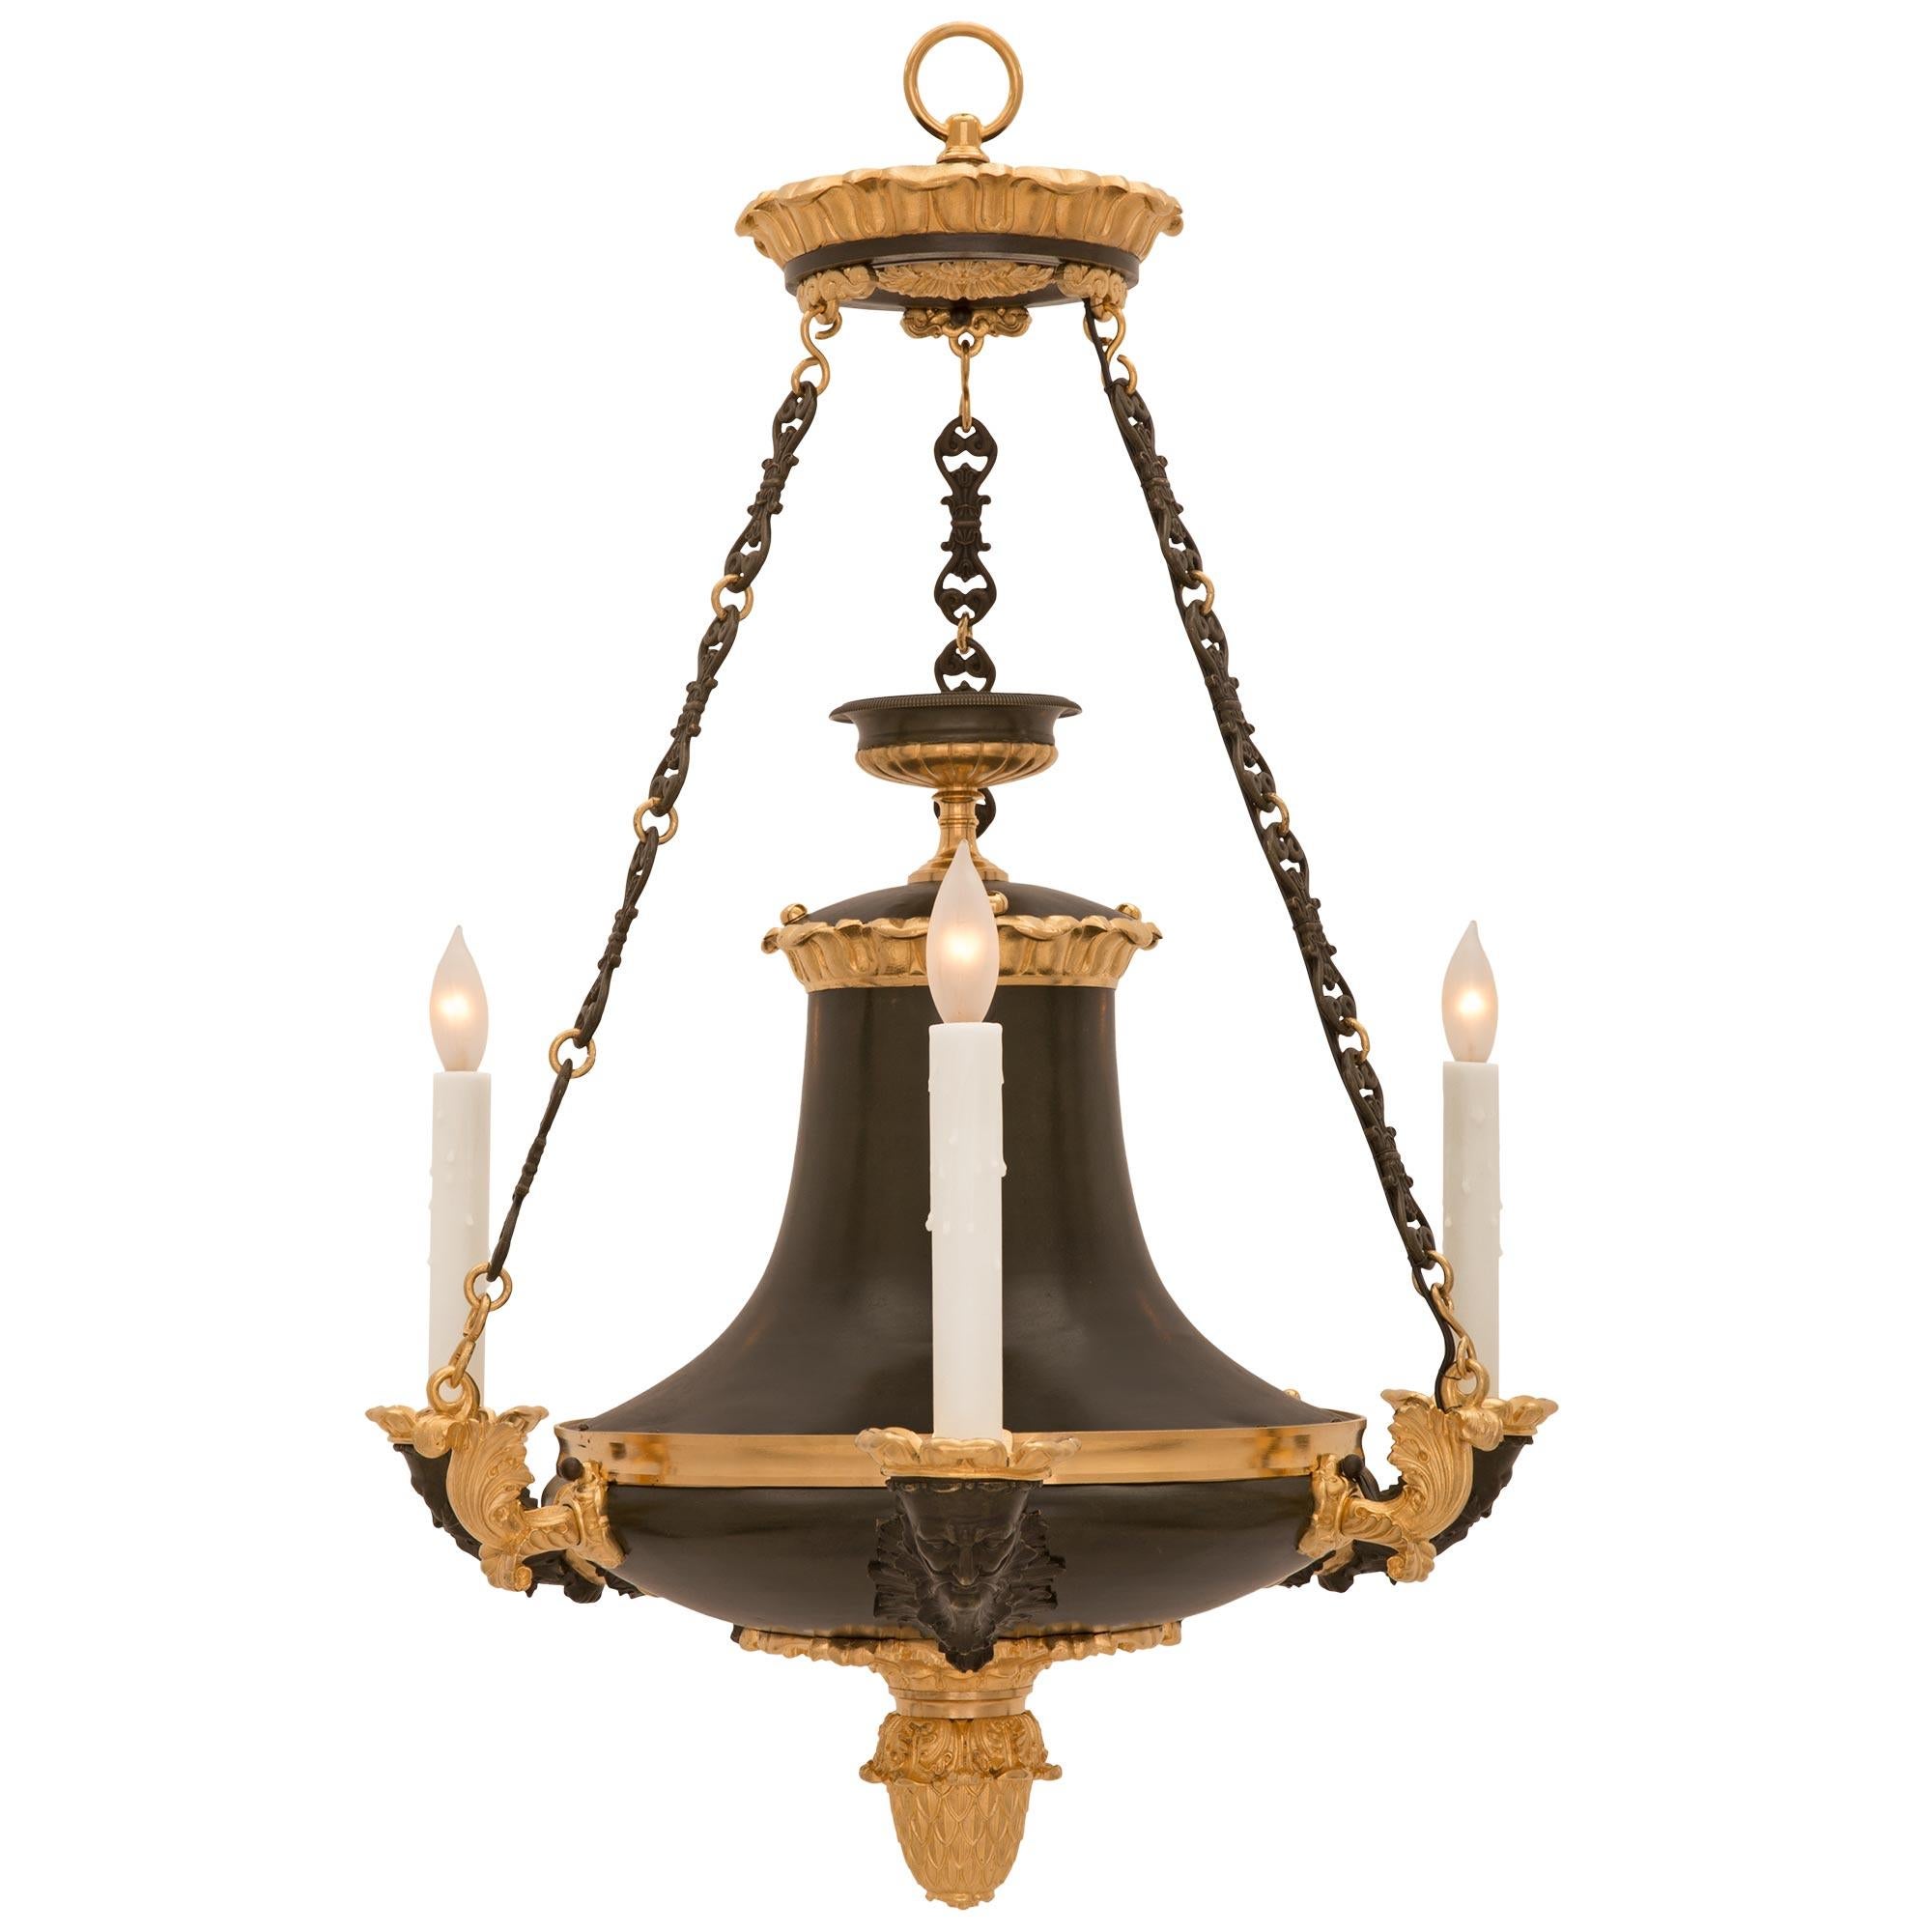 A handsome and high quality French 19th century Empire st. patinated bronze and ormolu chandelier. The three arm chandelier is centered by a beautiful richly chased bottom acorn finial amidst impressive scrolled foliate movements. Each arm displays